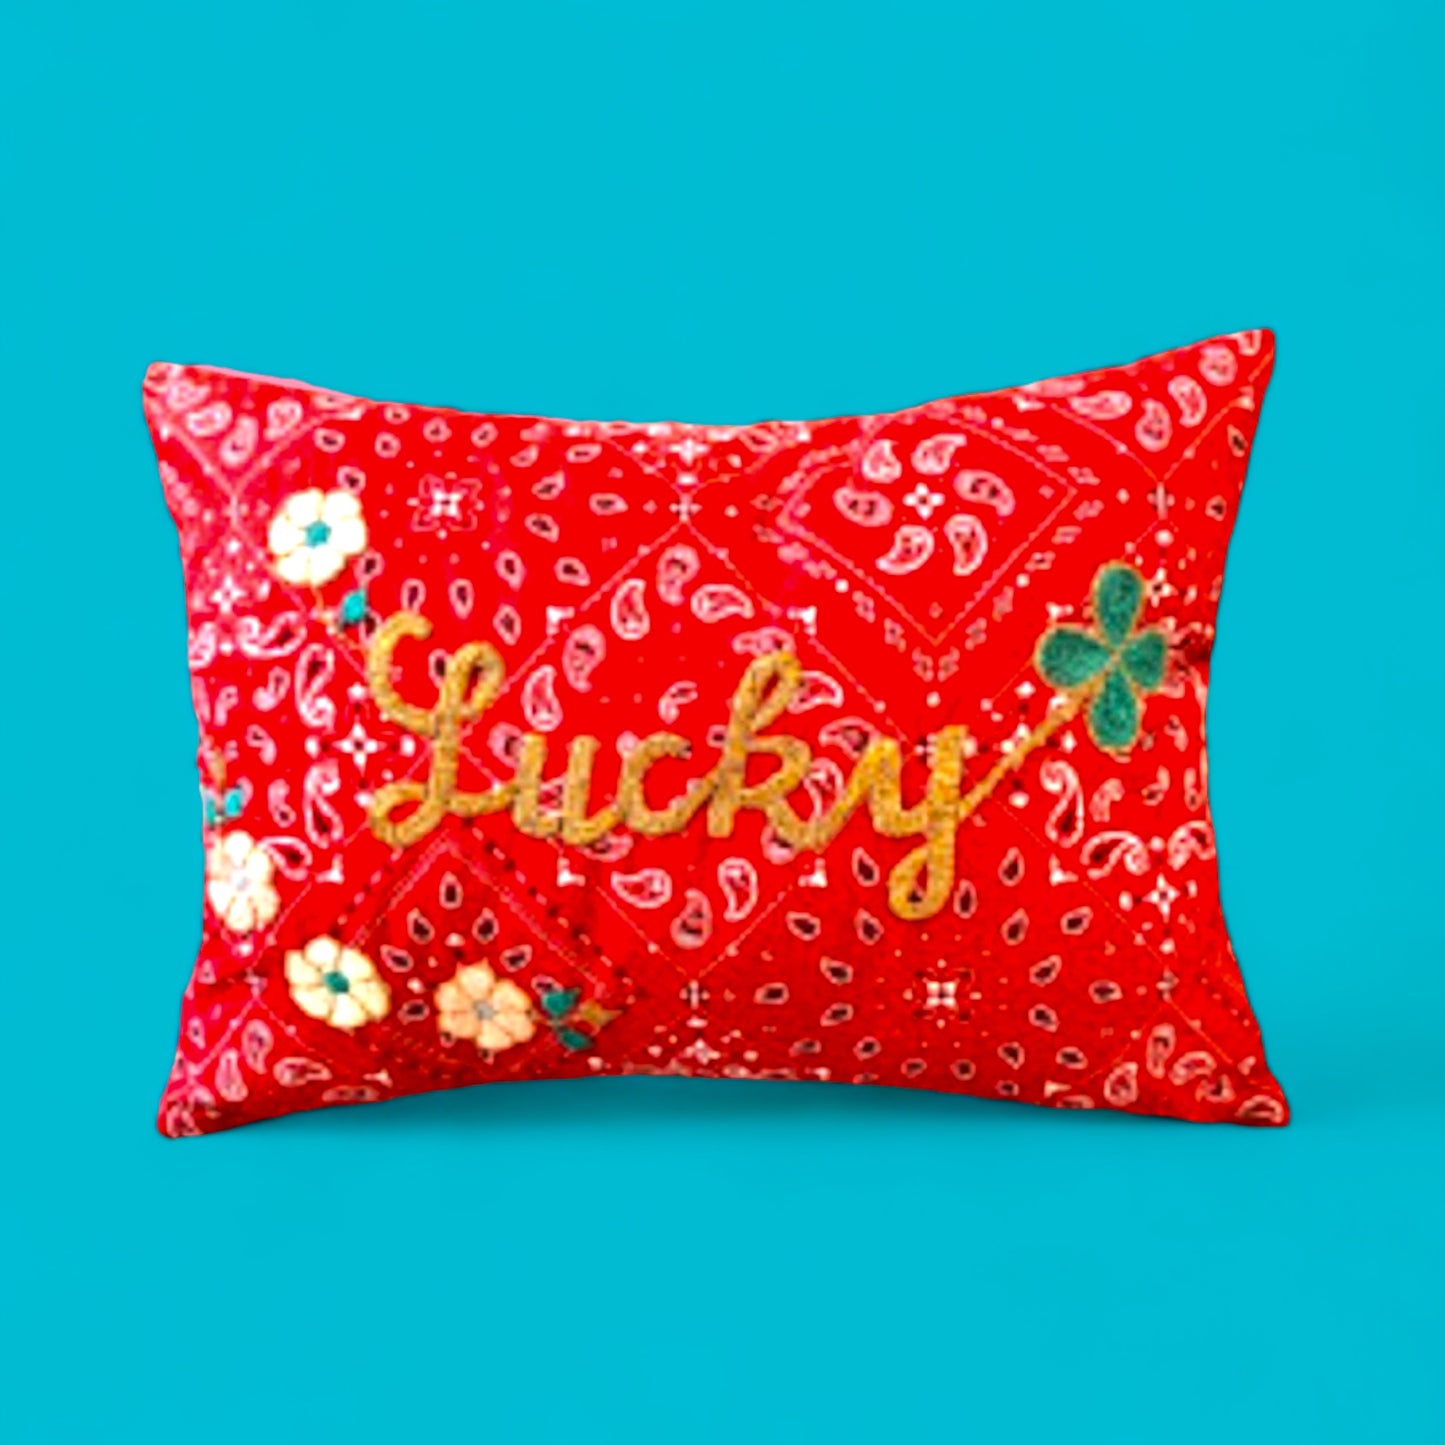 French Hand-Embroidered Pillow - Lucky - Hella Kitsch